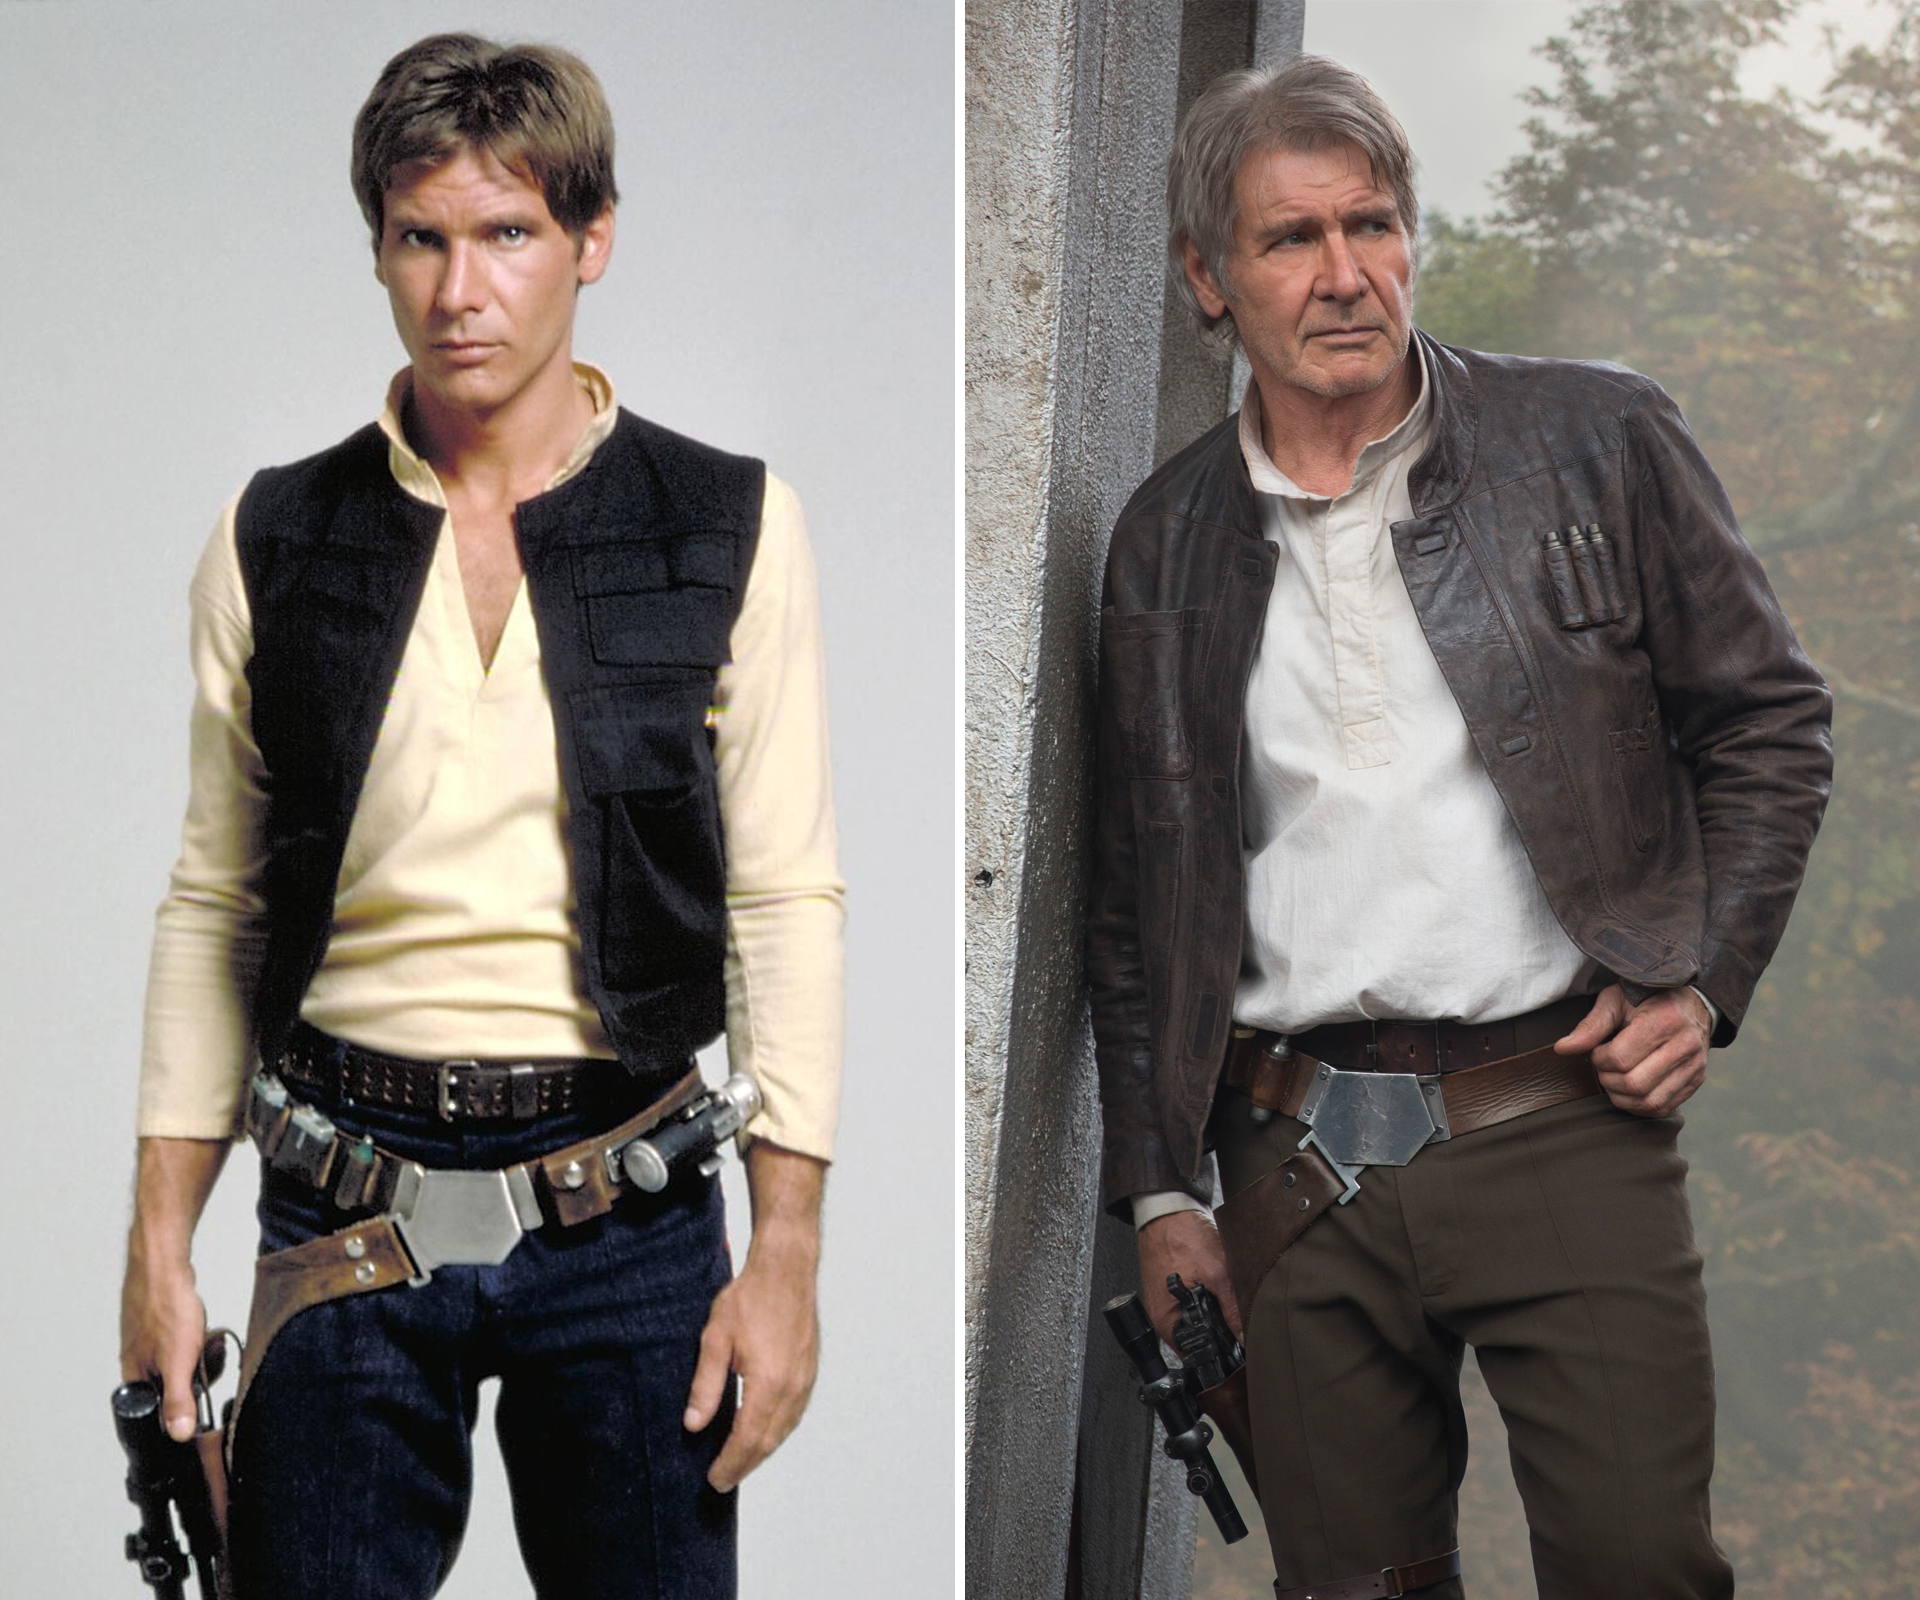 The cast of Star Wars: Then and now